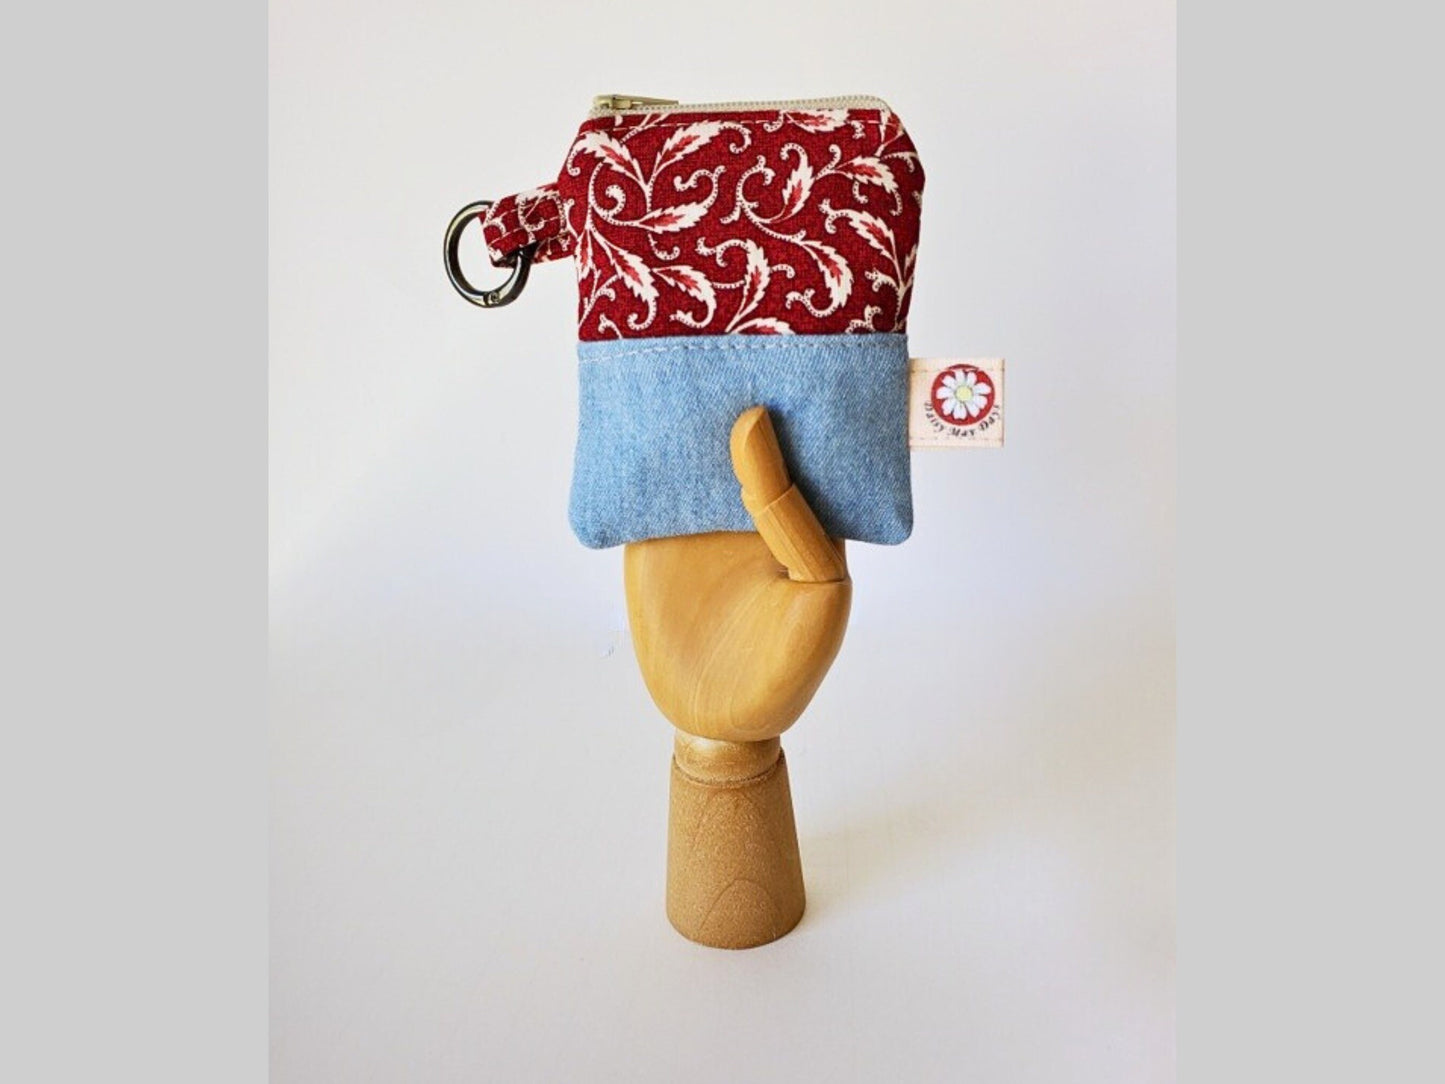 The Mini Mini Coin Pouch, Small Zippered Purse in Denim and Red Floral Print